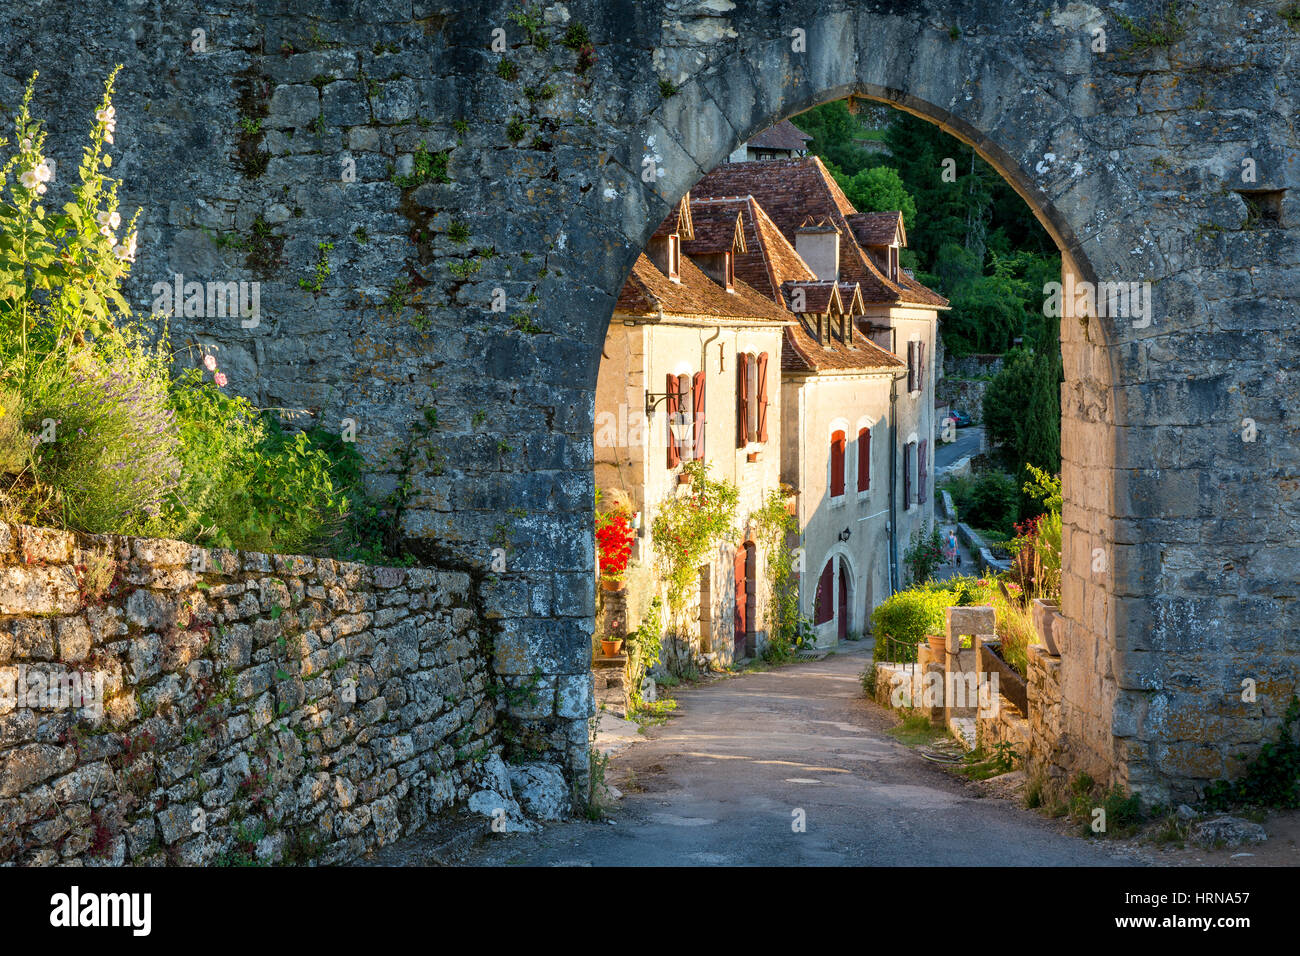 Setting sunlight on homes at entry gate to Saint-Cirq-Lapopie, Lot Valley, Occitanie, France Stock Photo